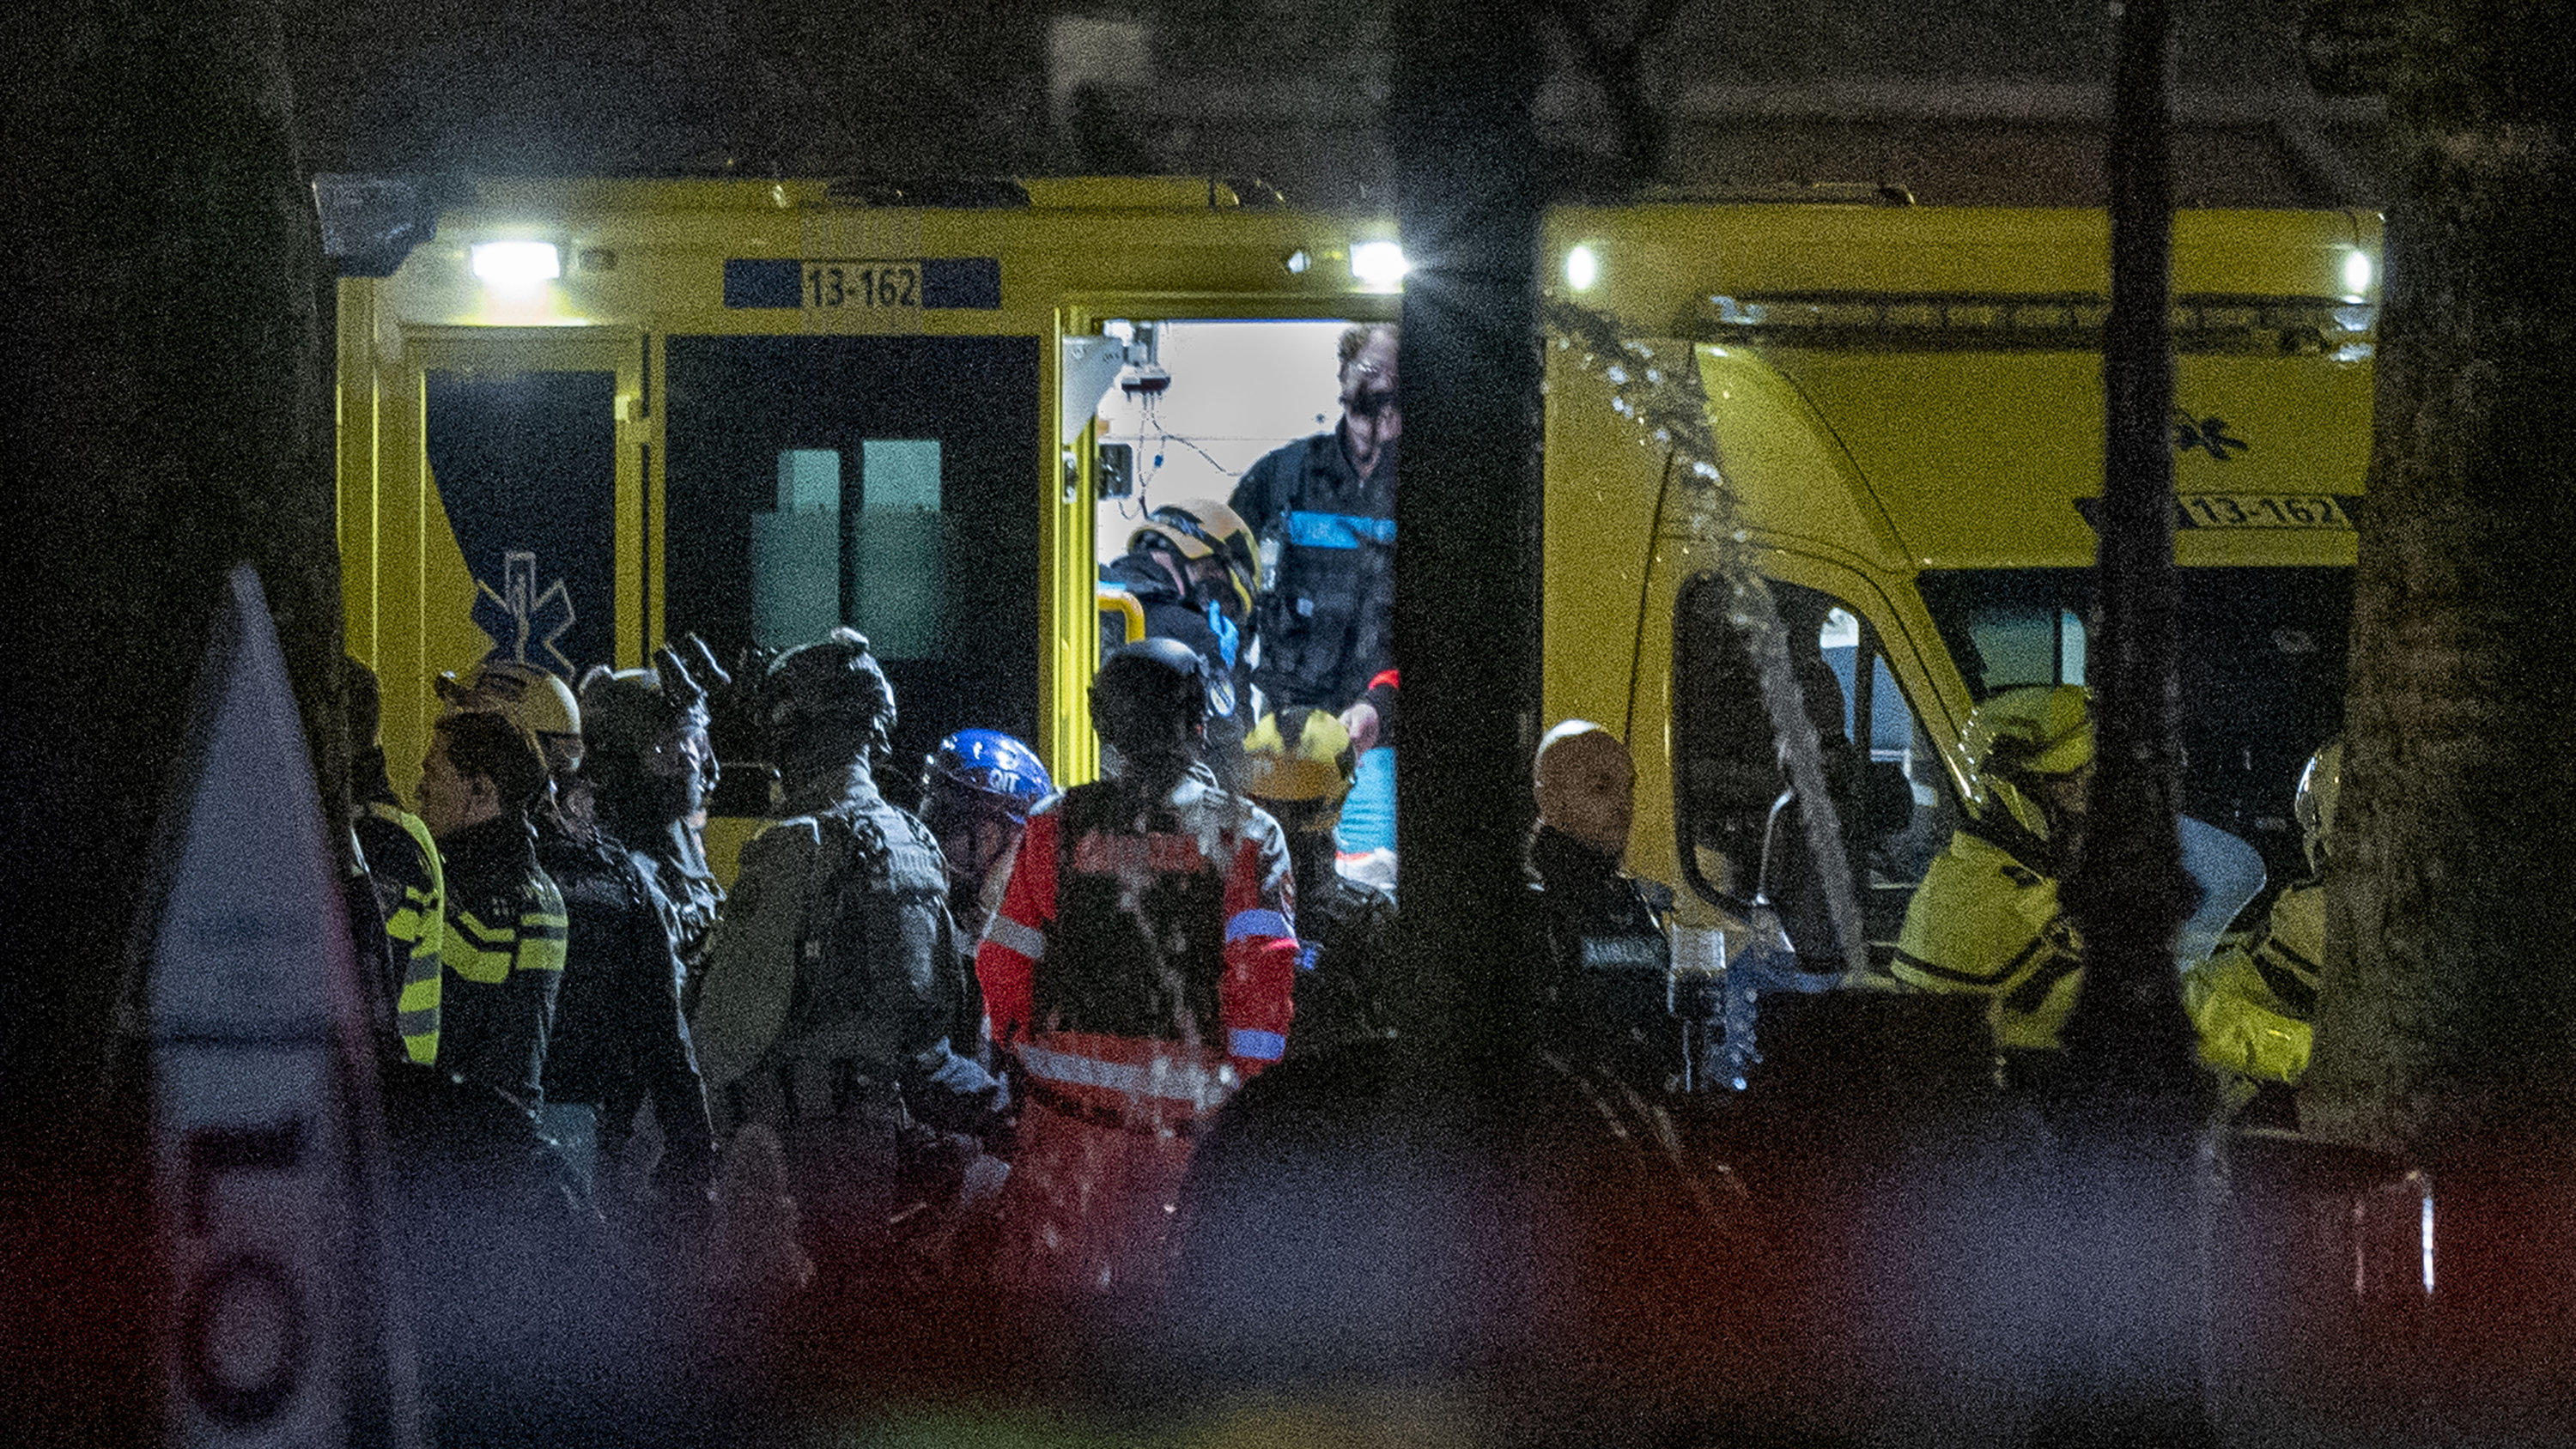 Police special intervention units and rescue workers are seen as the injured hostage taker is carried into an ambulance in Amsterdam, Netherlands, Tuesday, Feb. 22, 2022, where the armed person was holed up in the Apple Store with at least one hostag